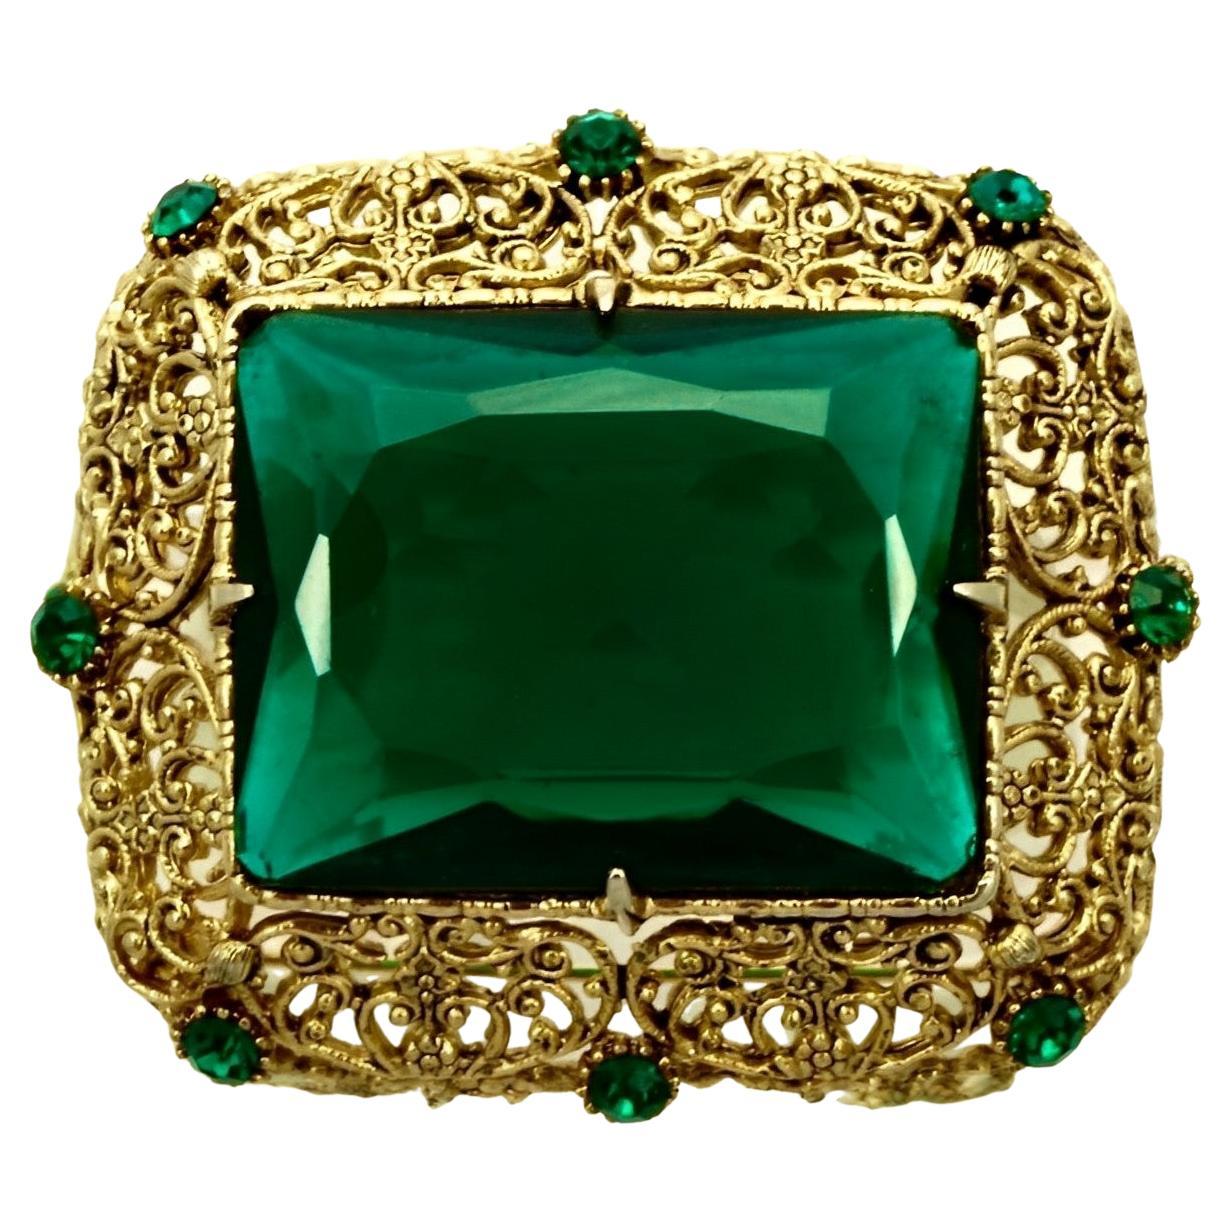 Gold Plated Filigree and Emerald Green Glass Statement Brooch circa 1960s For Sale